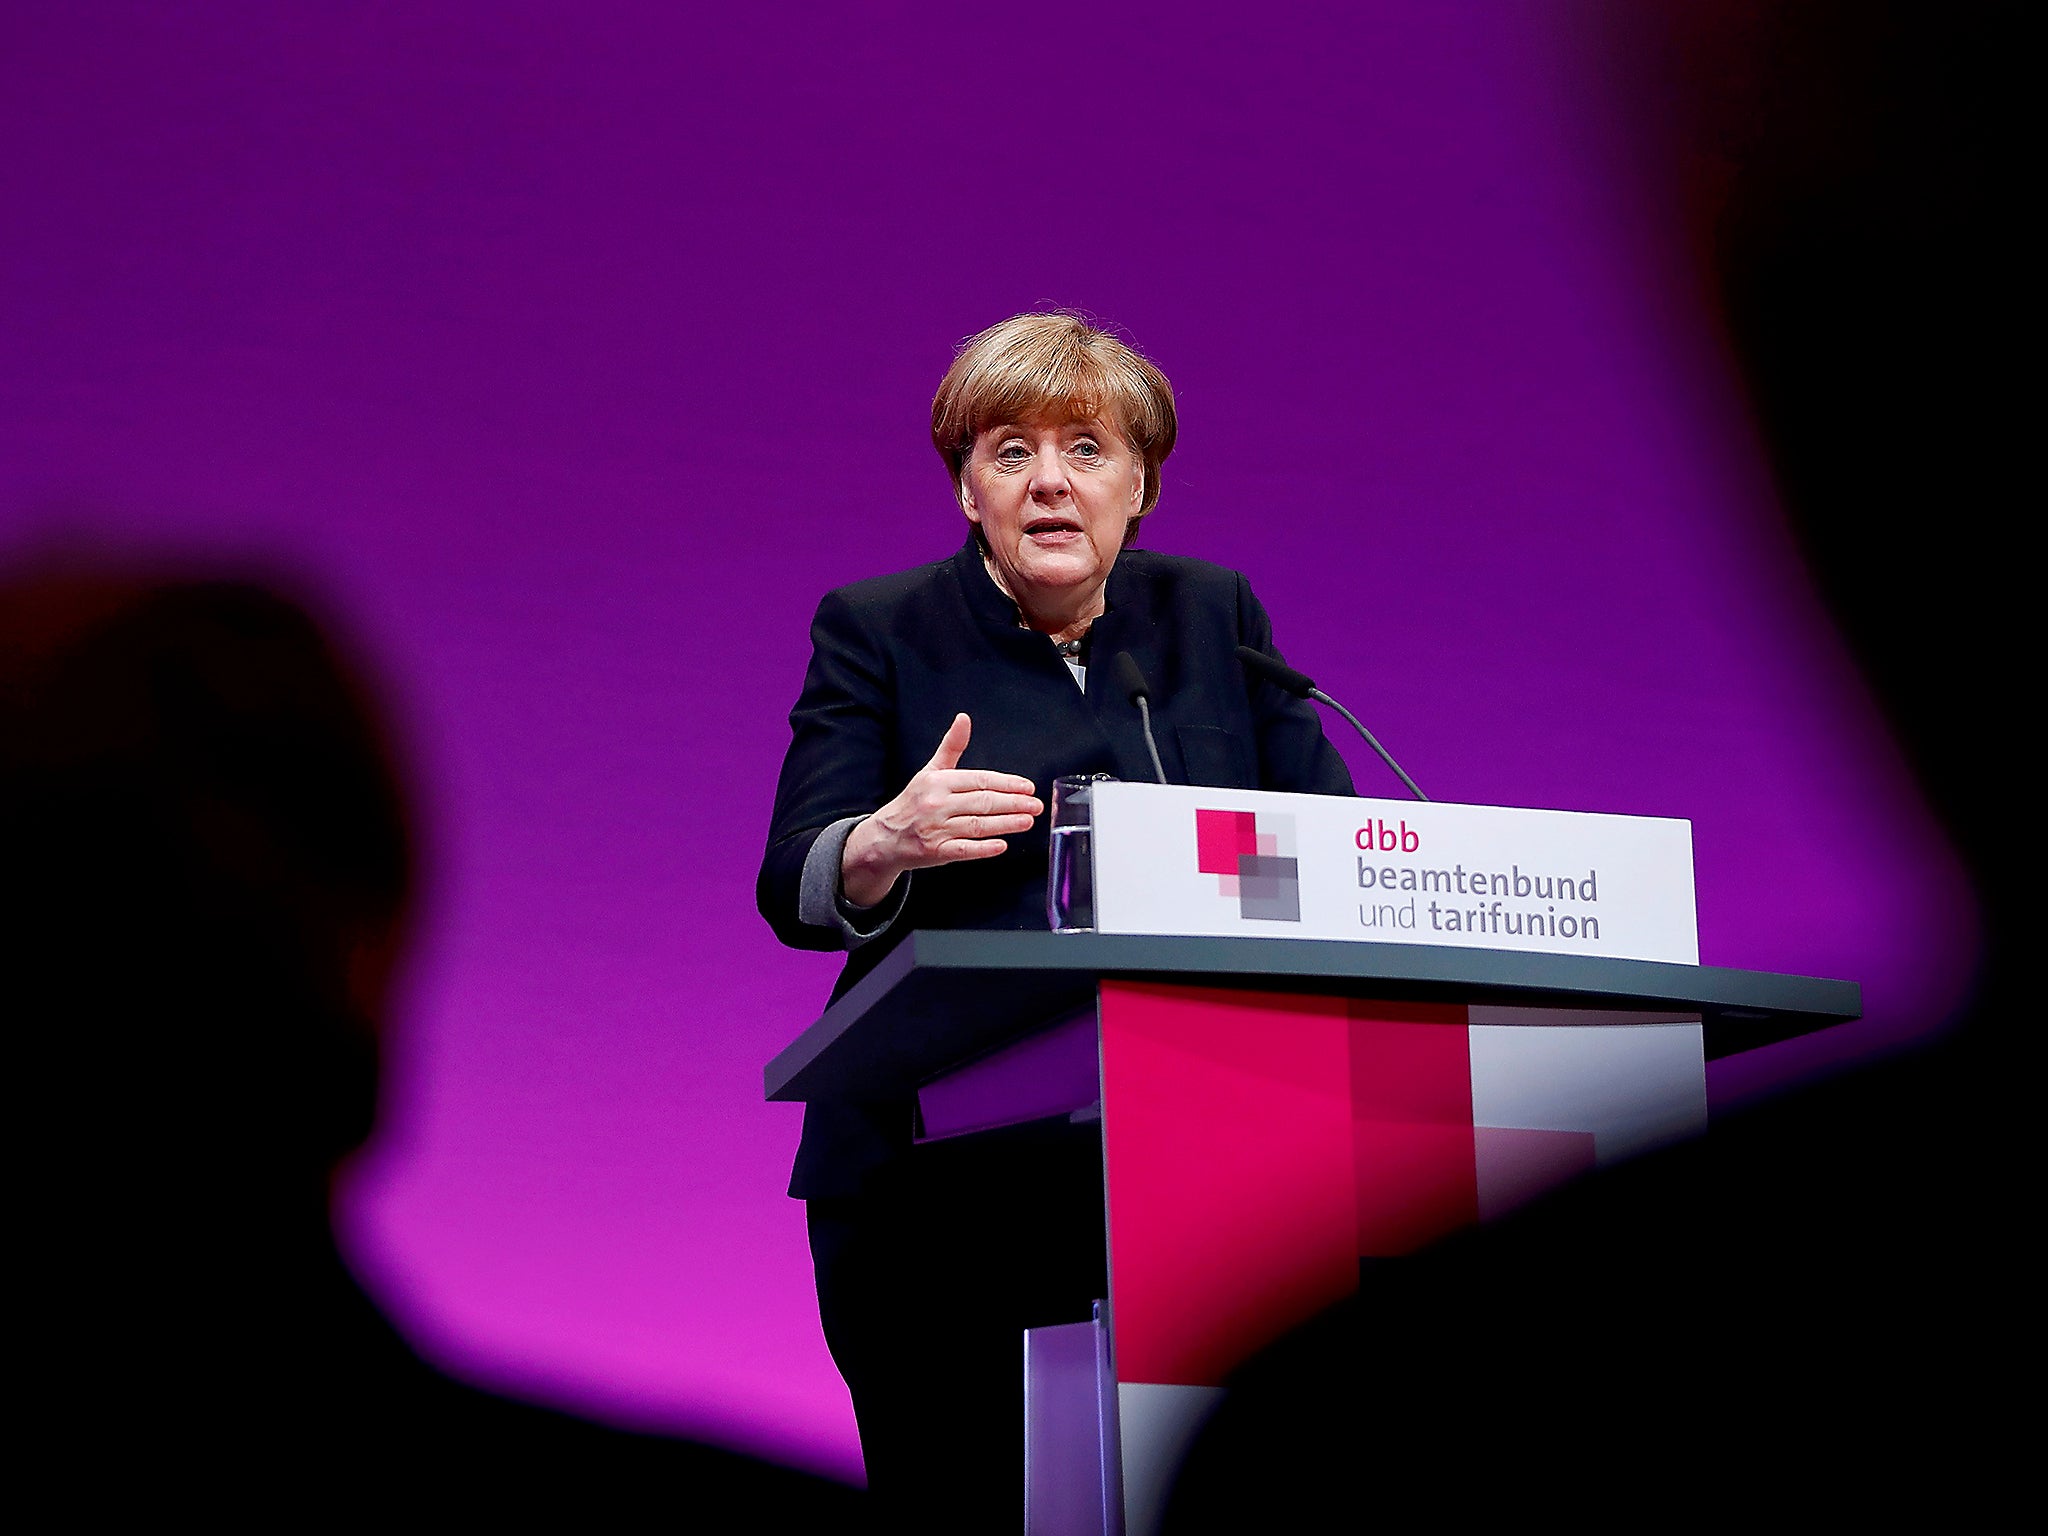 German Chancellor Angela Merkel delivers a speech during the yearly meeting of Germany's government workers union Deutscher Beamtenbund (dbb) in Cologne, Germany